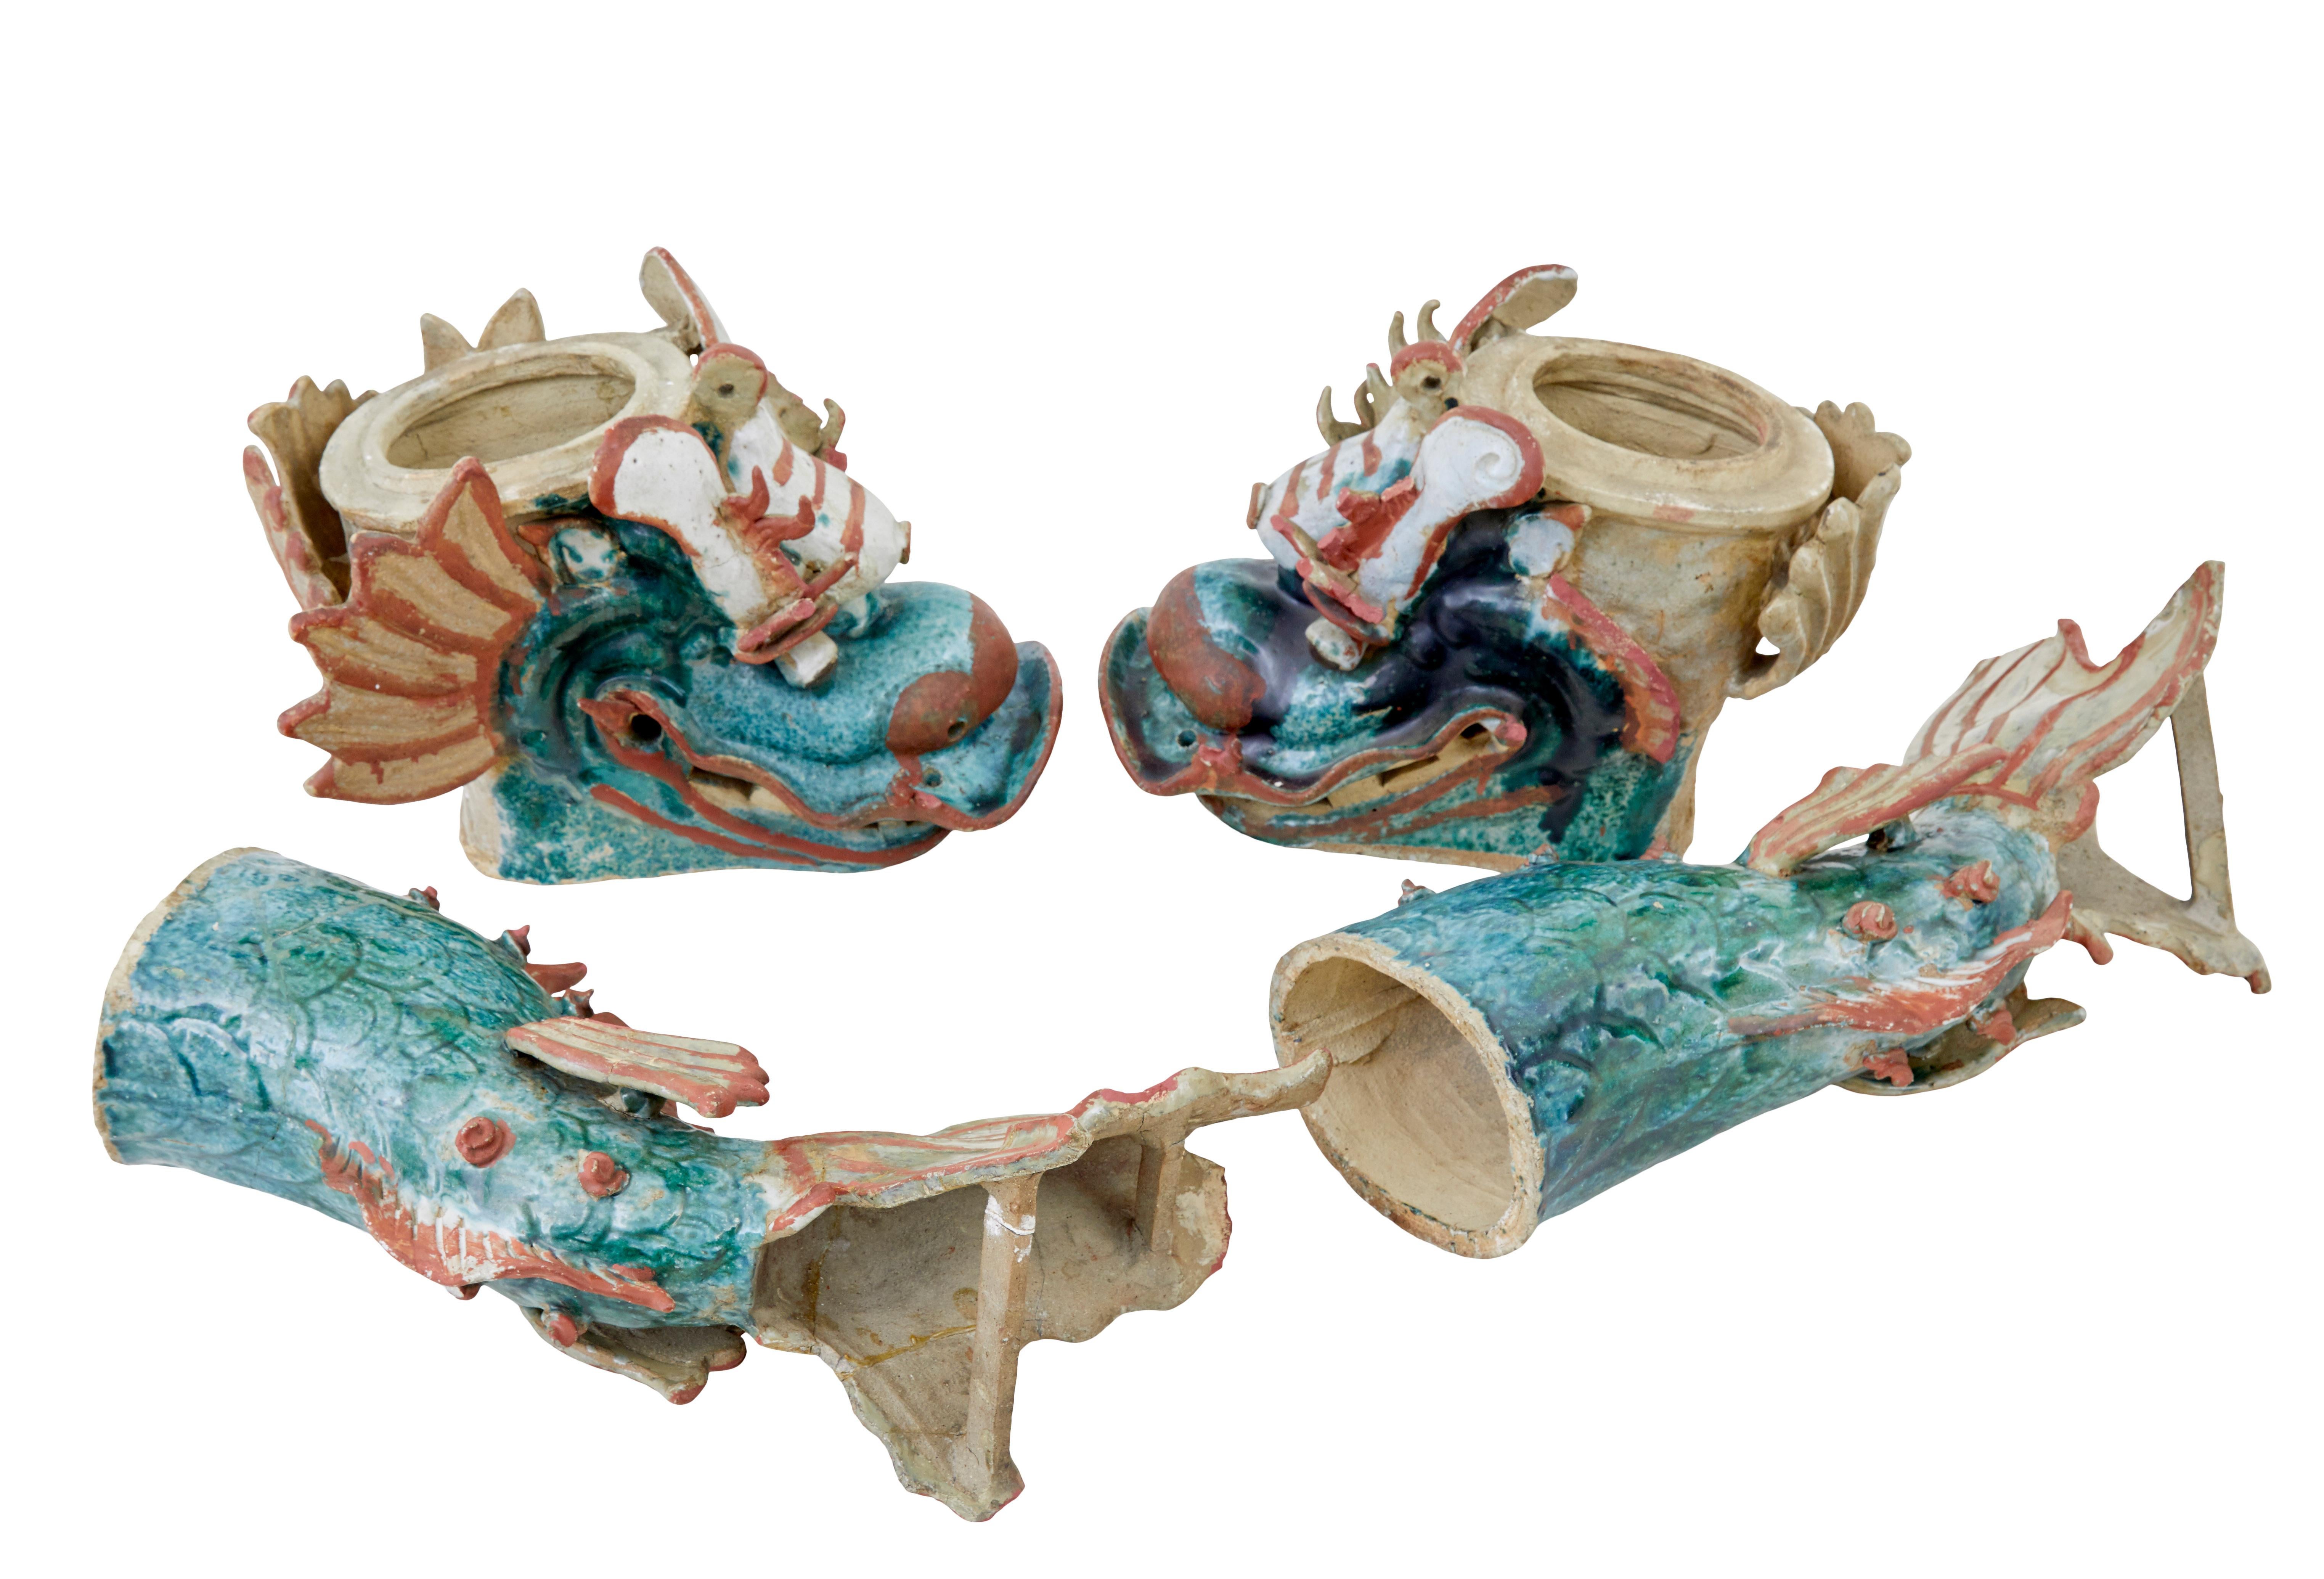 Pair of 19th century Japanese ceramic Shachikoko roof ornaments For Sale 3